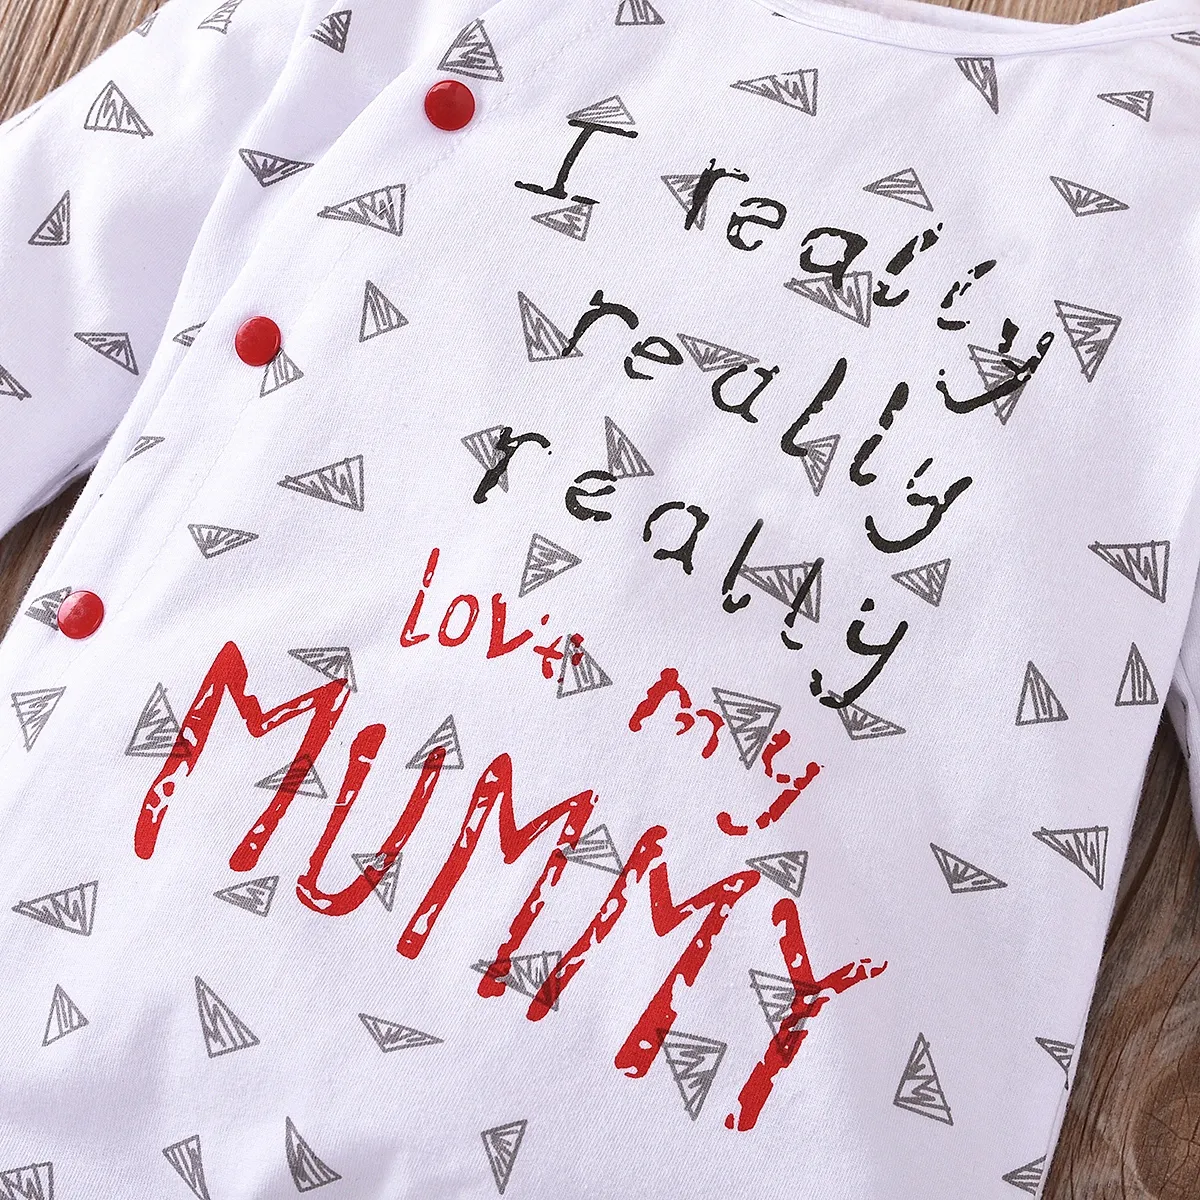 Baby Boy/Girl 95% Cotton Long-sleeve Footed Letter Print Jumpsuit Red/White big image 1